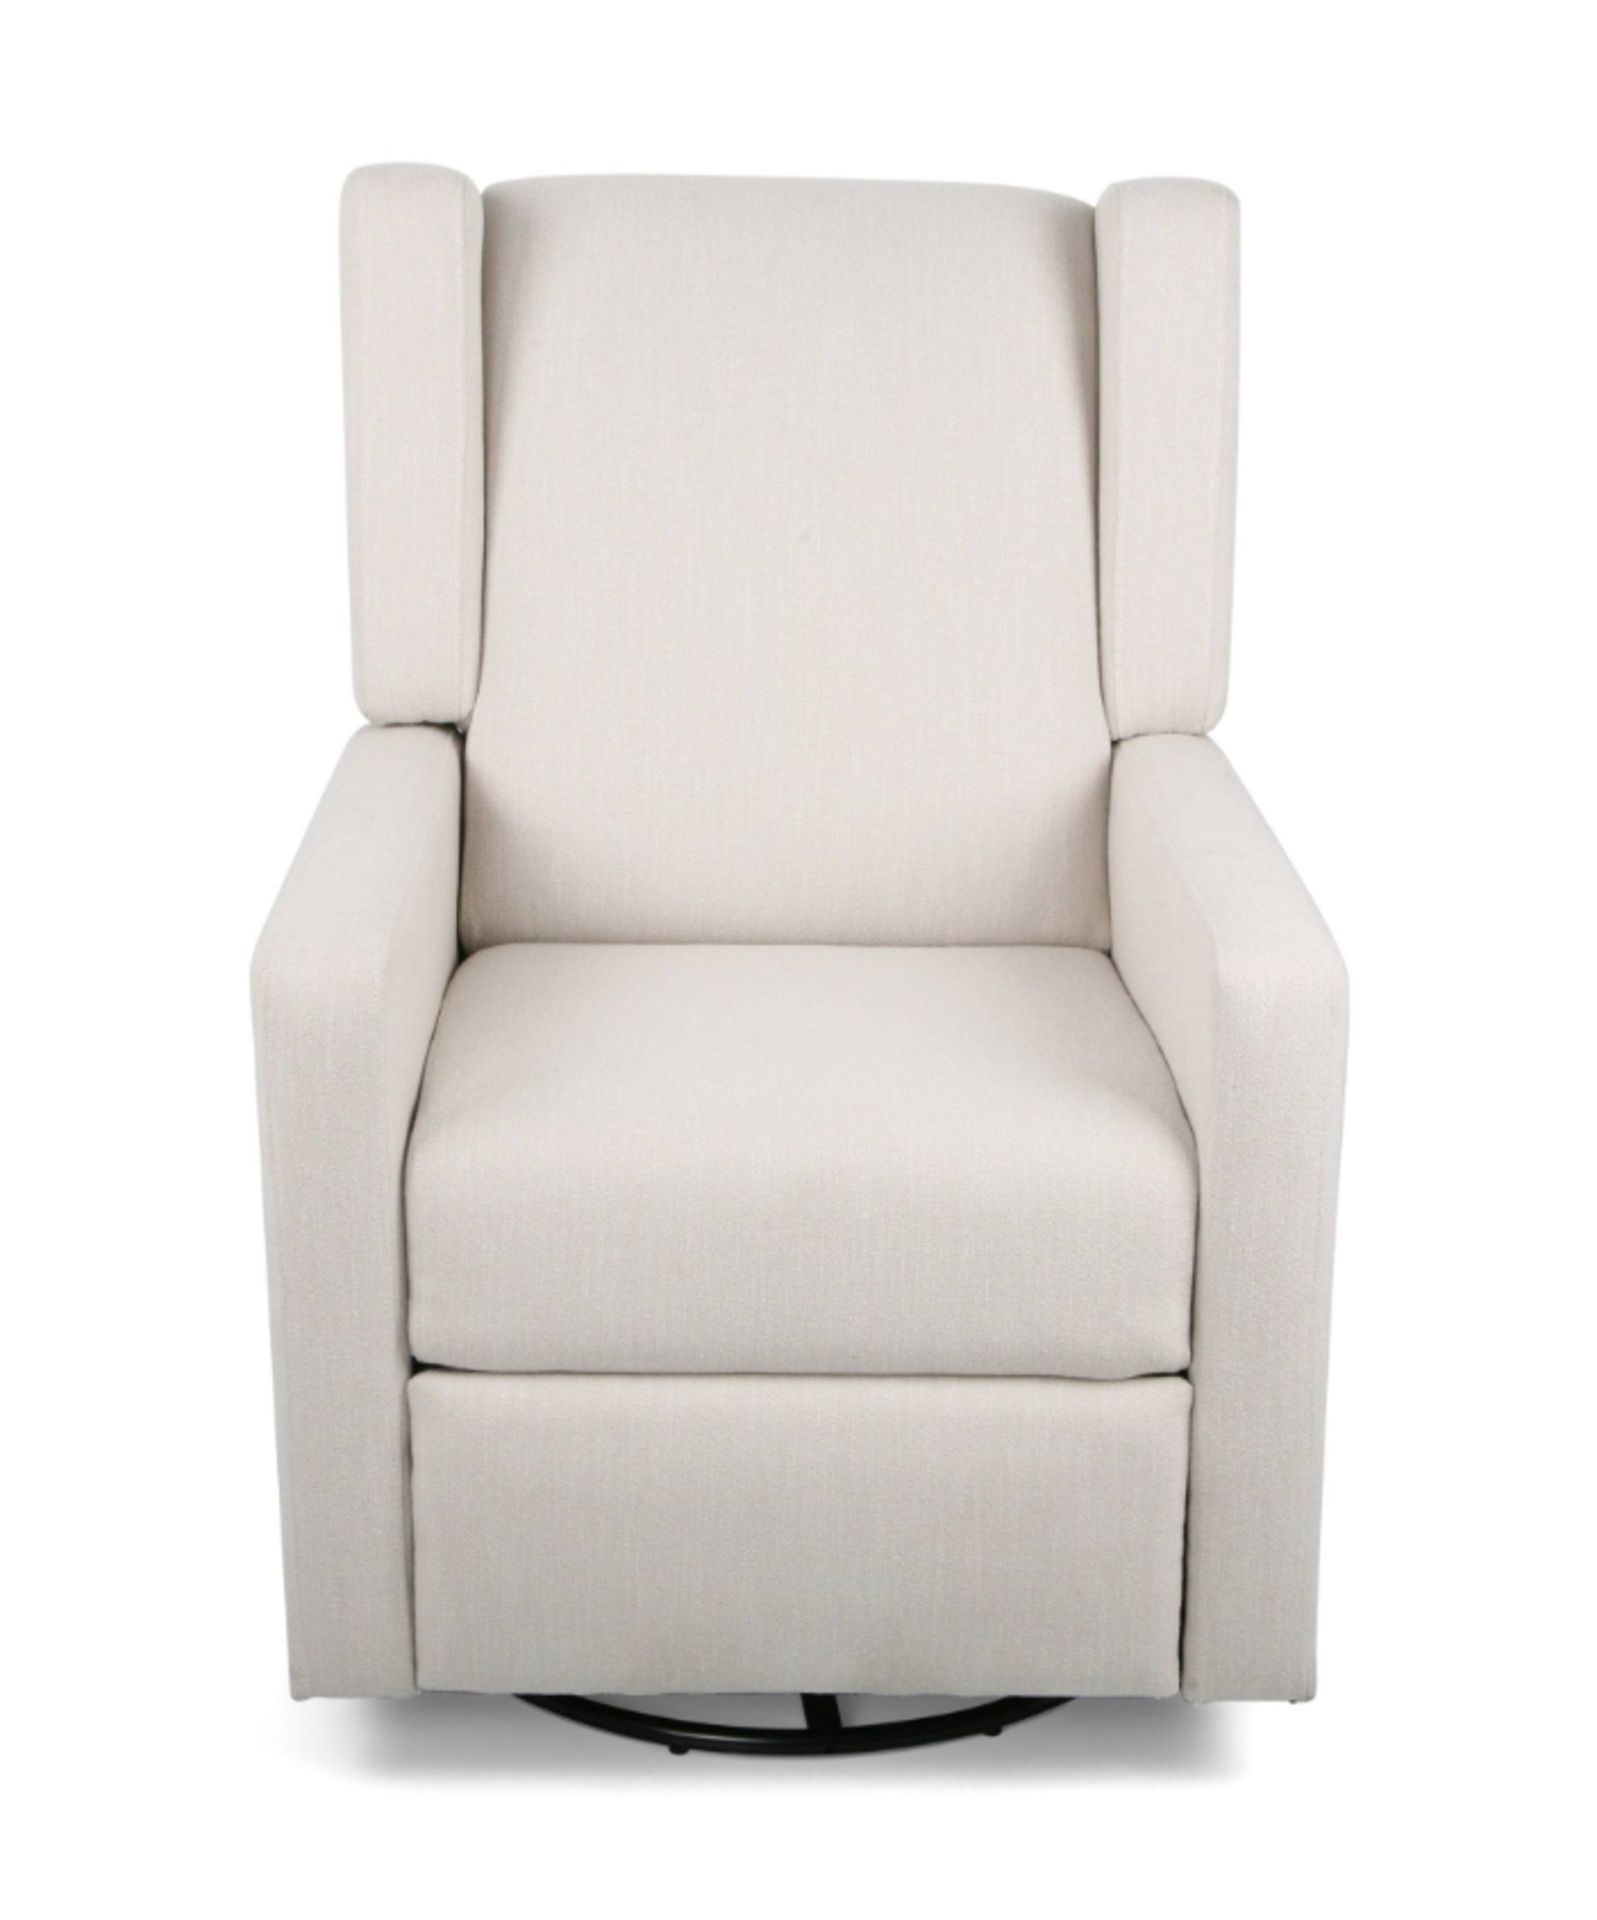 **(BRAND NEW SEALED BOX)**SWIVEL RECLINER AND BEIGE